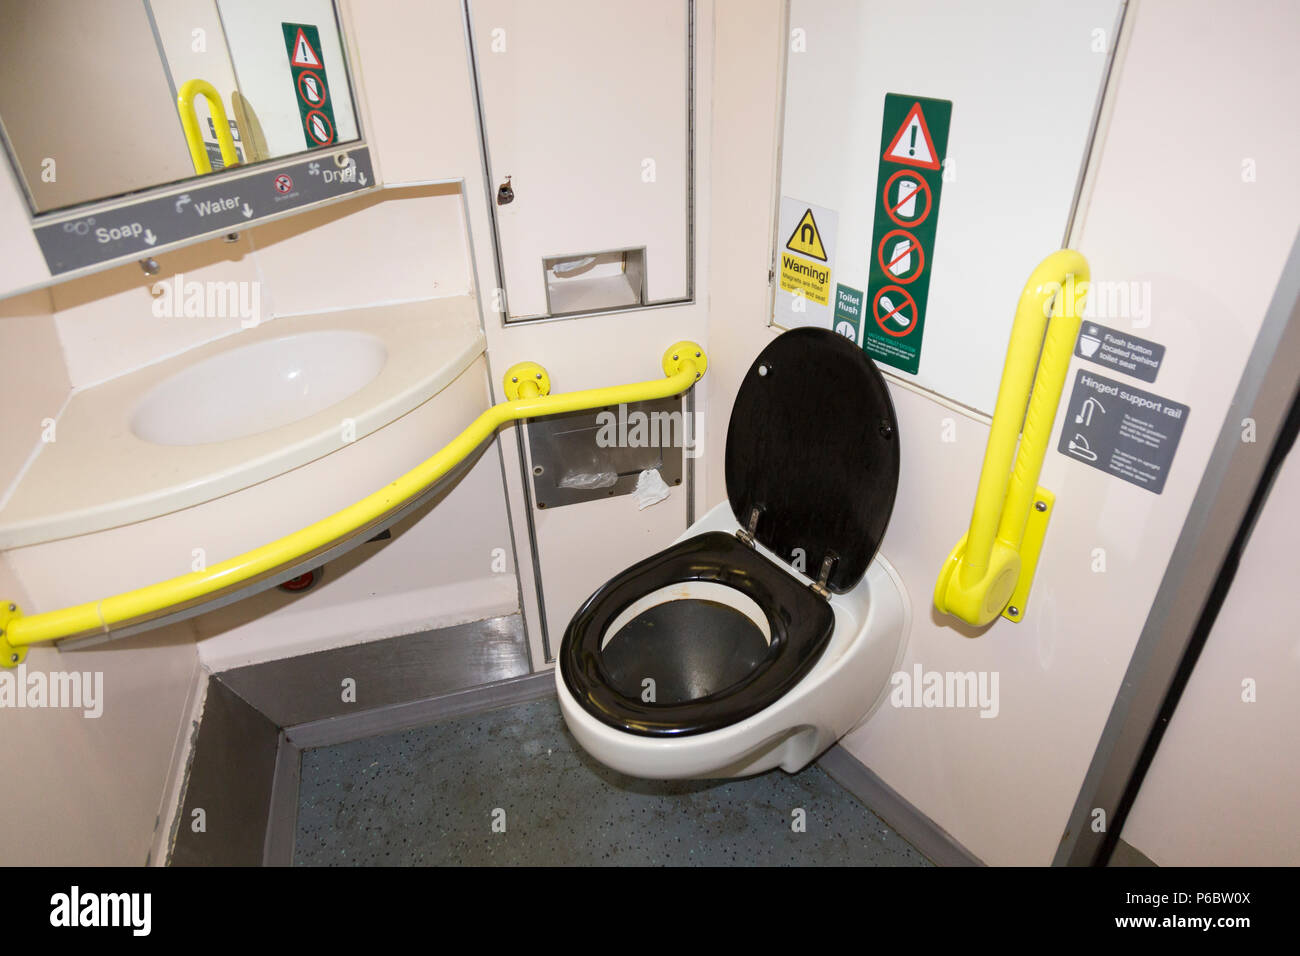 Railway toilet / lavatory – with wet floor and which is used & a little dirty – with disabled access and bars, & basin sink on UK train near SW London. UK. Stock Photo